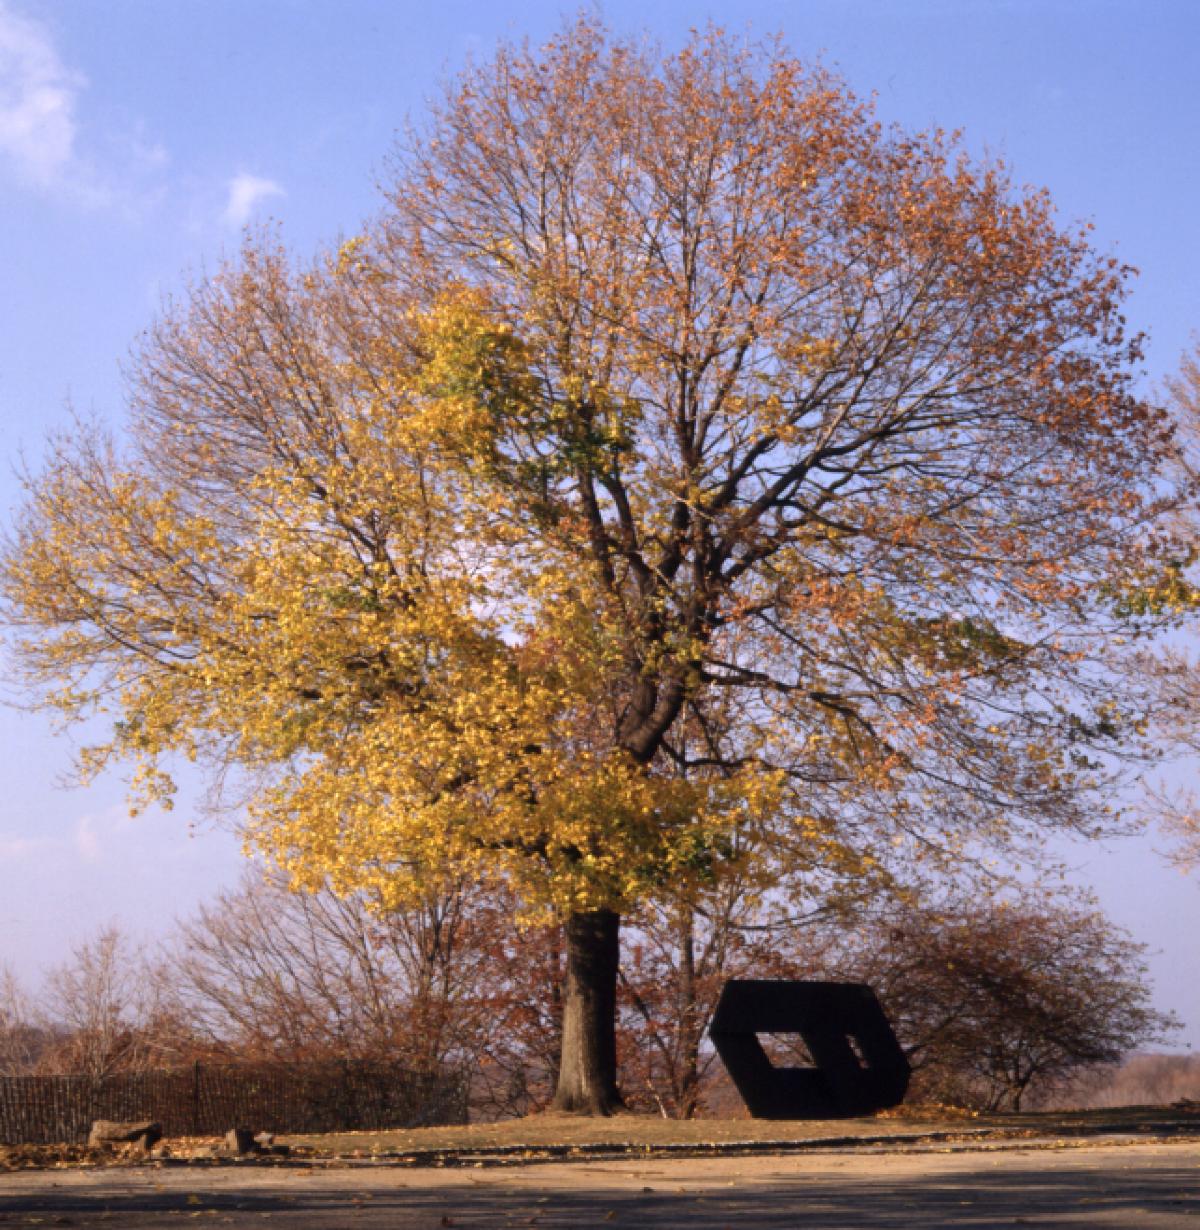 Norway Maple, East Parking, Storm King Art Center, 2001